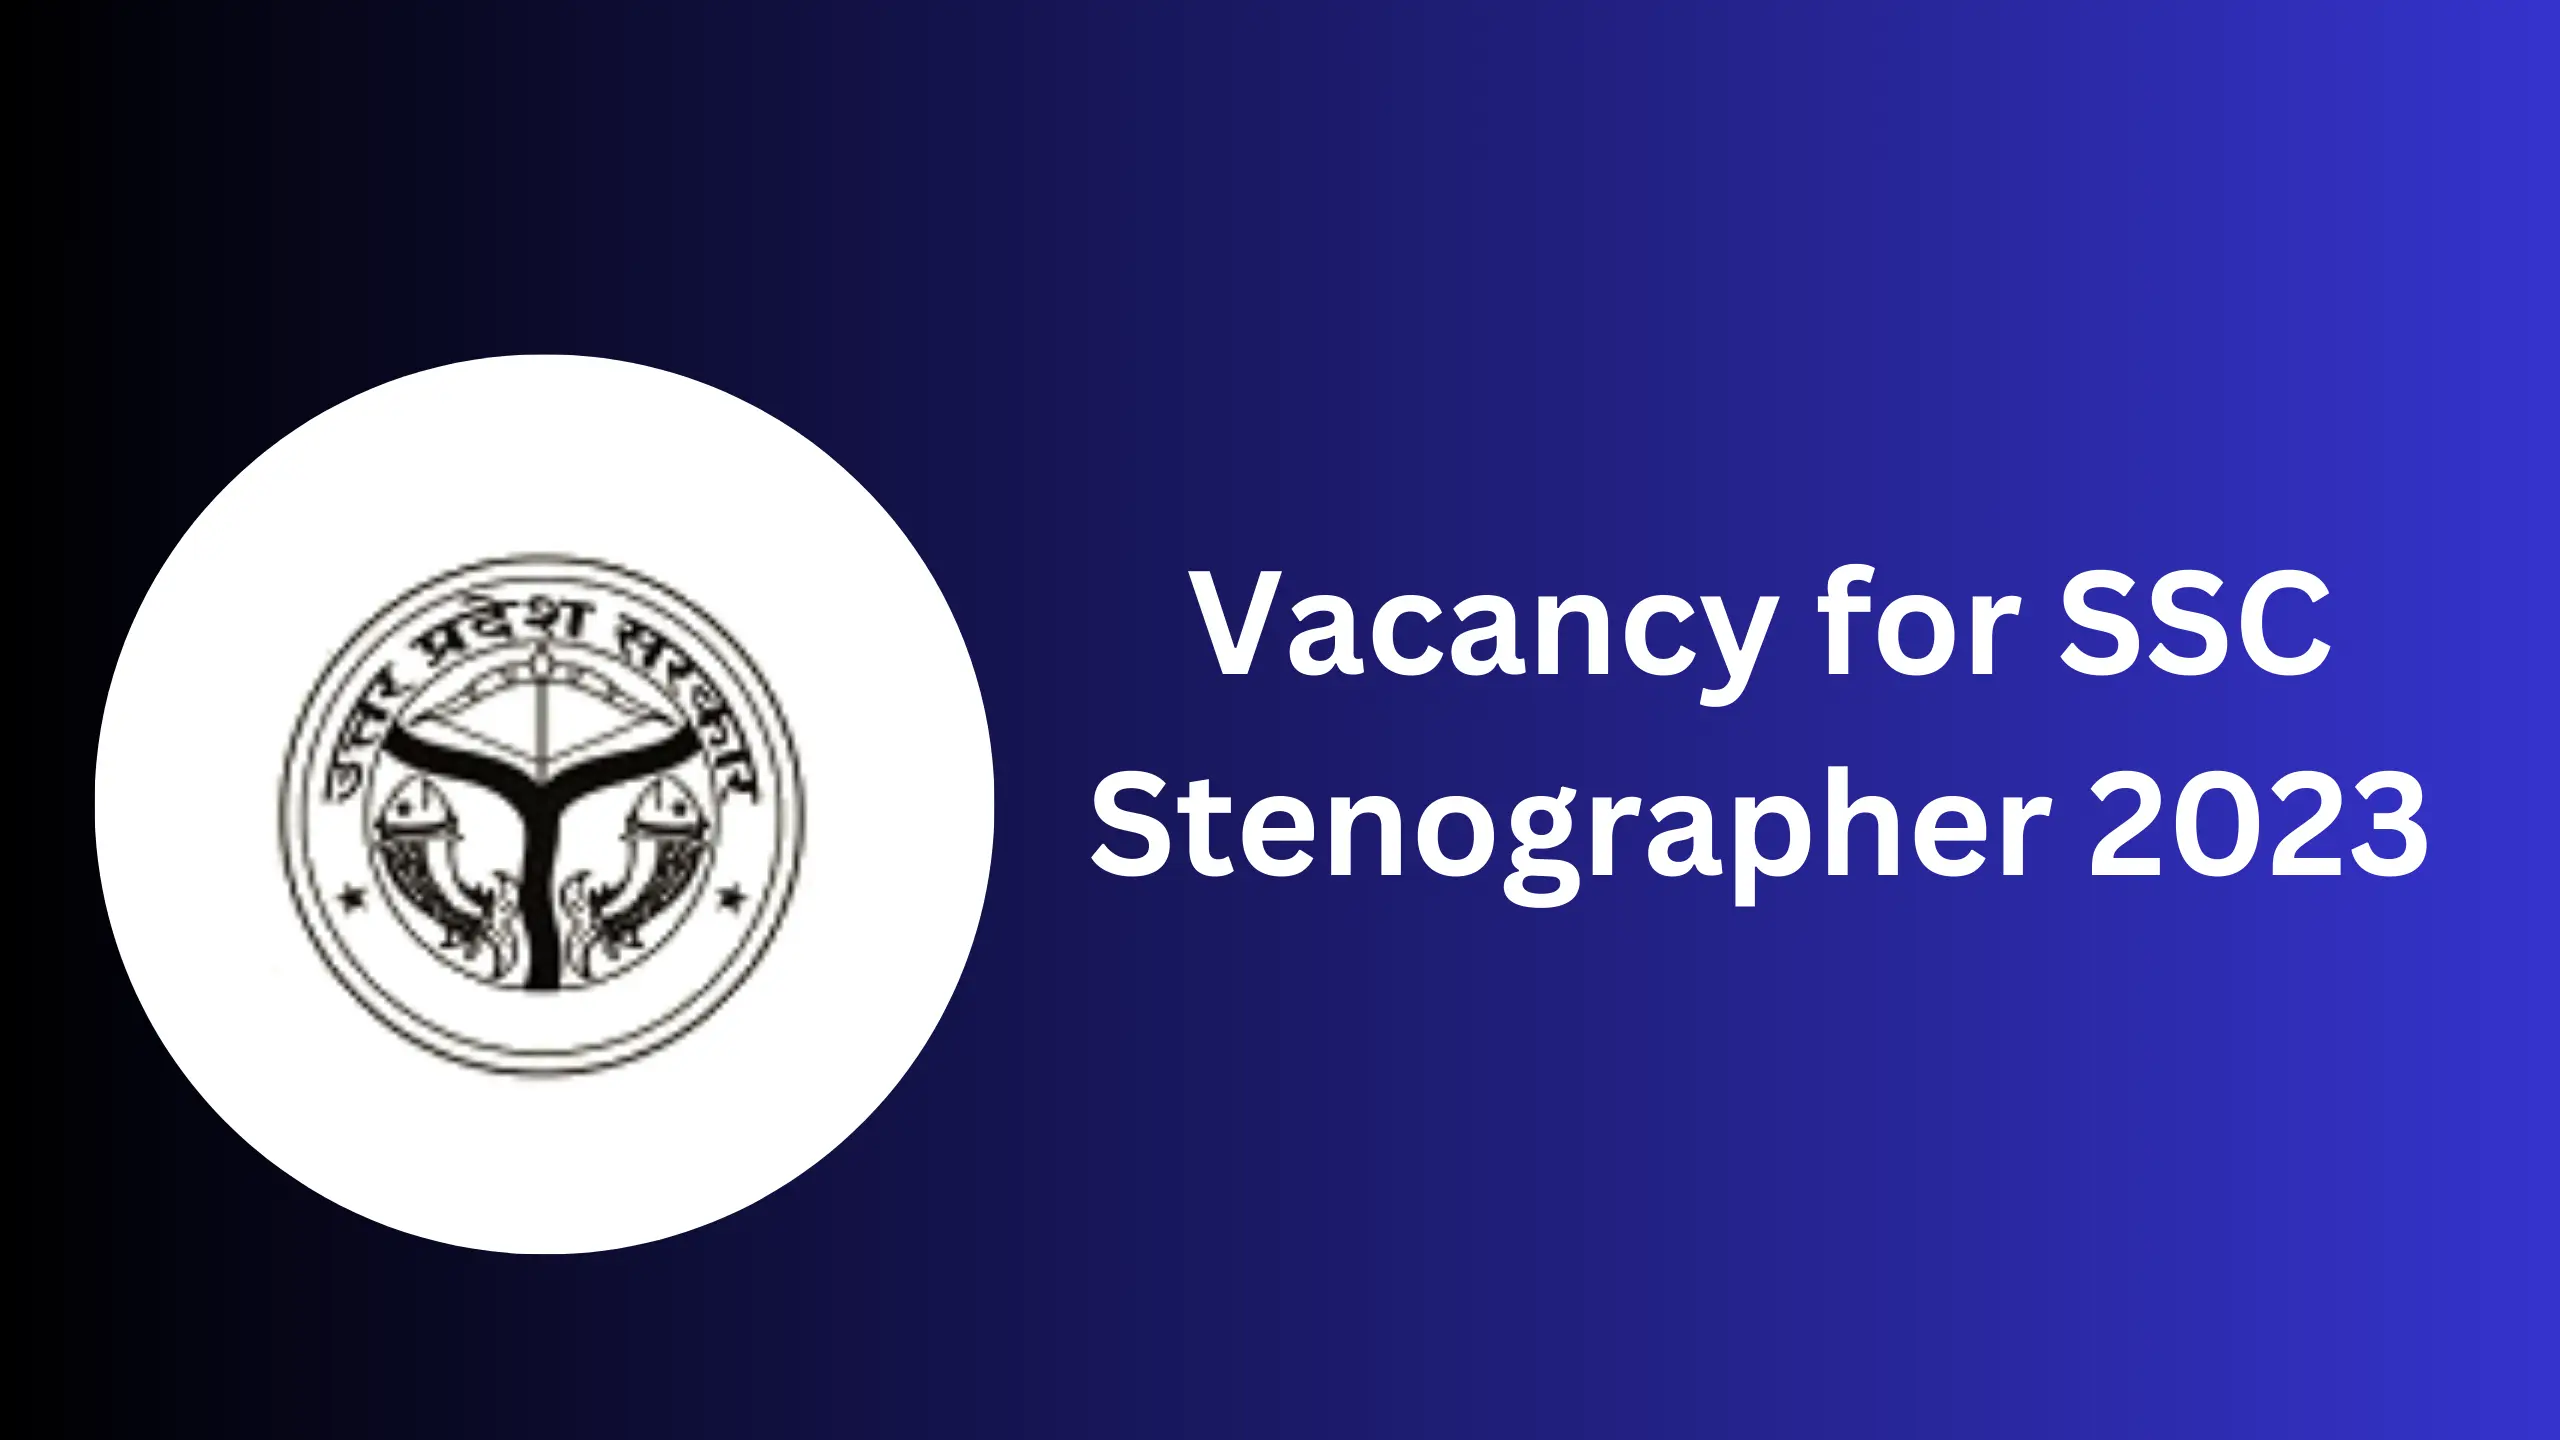 Vacancy for SSC Stenographer 2023